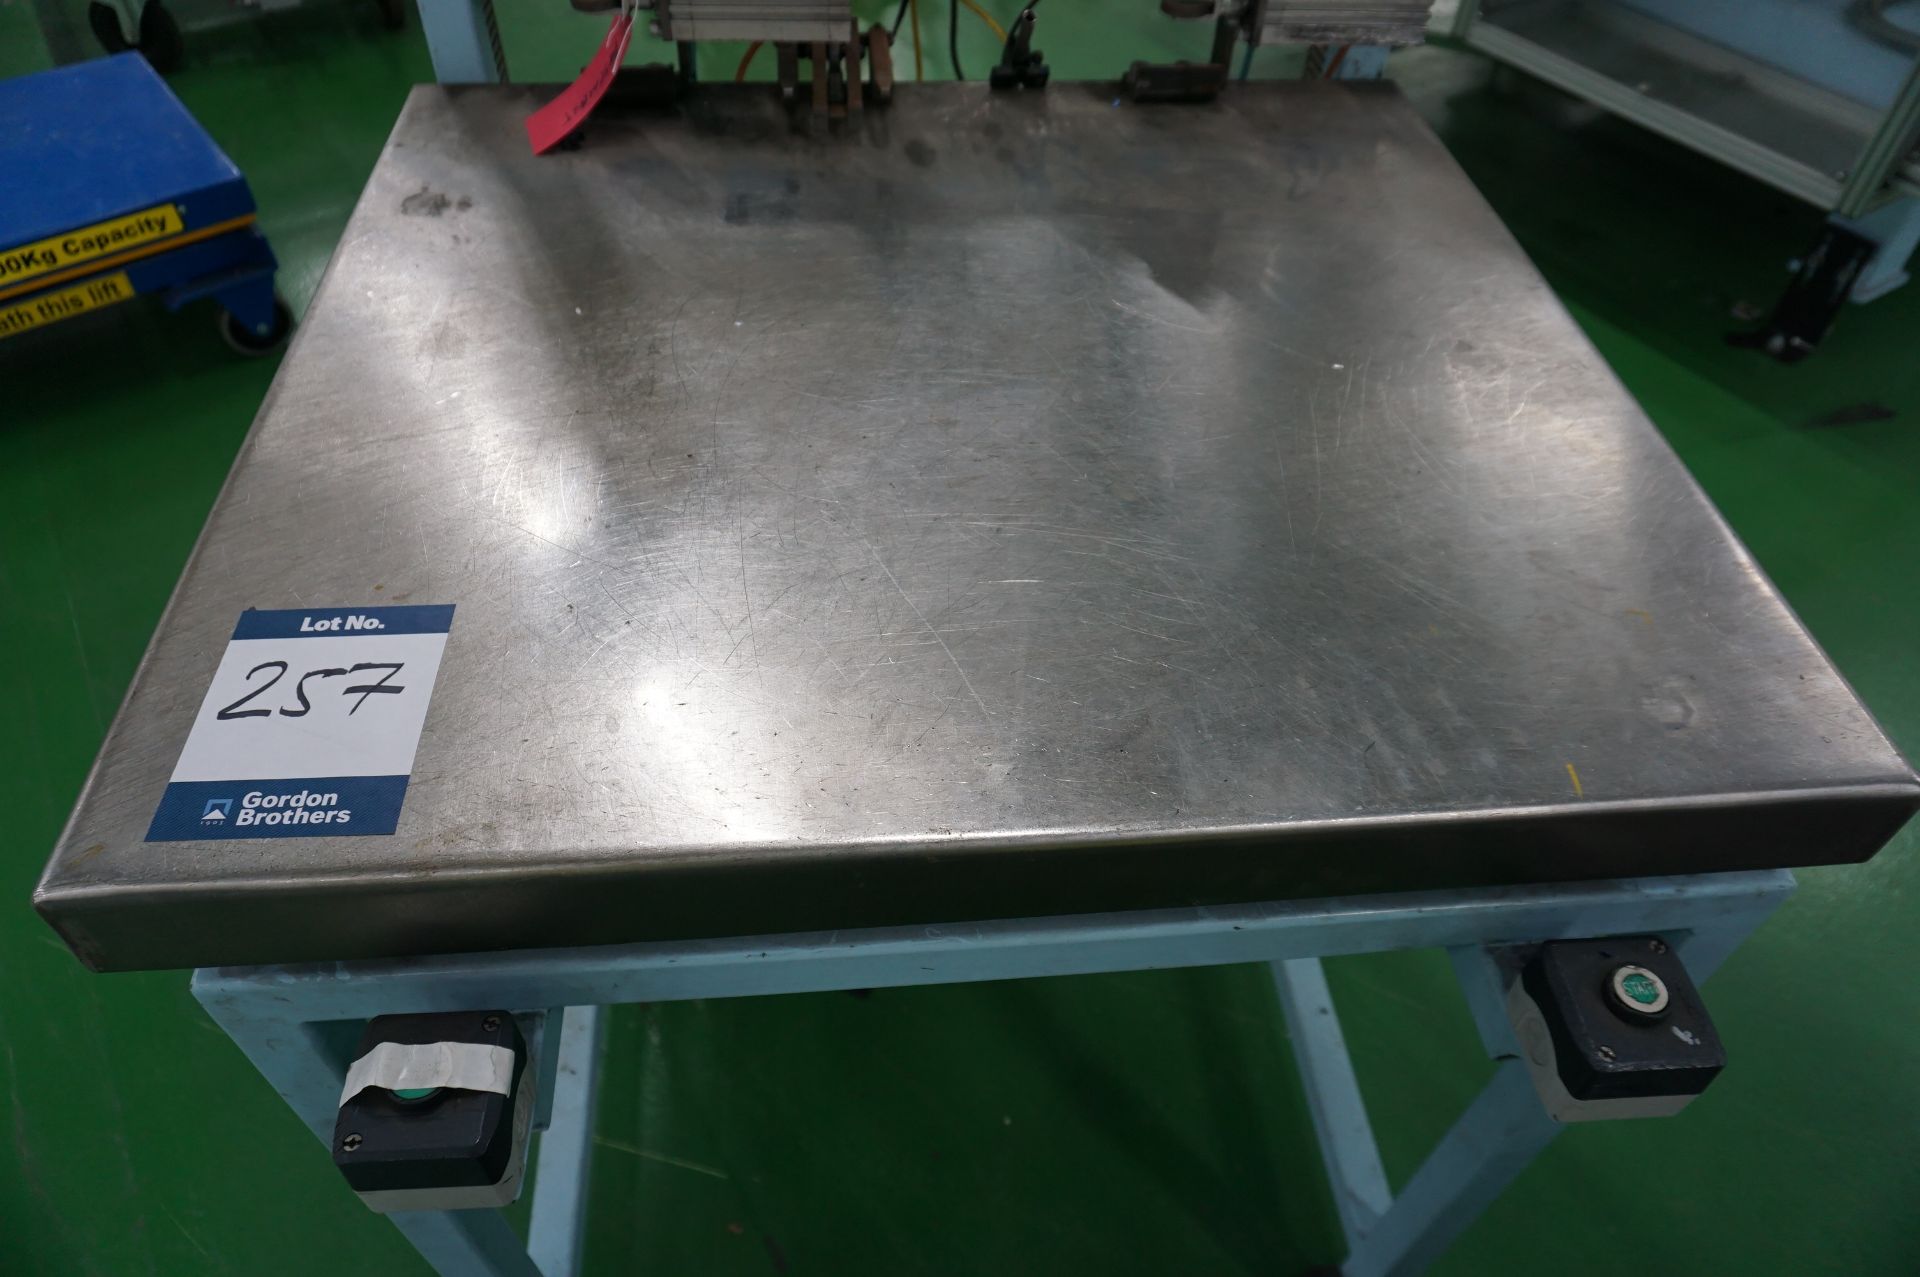 Radwag PUEHY digital scales with steel table weighing station and digital readout - Image 2 of 7